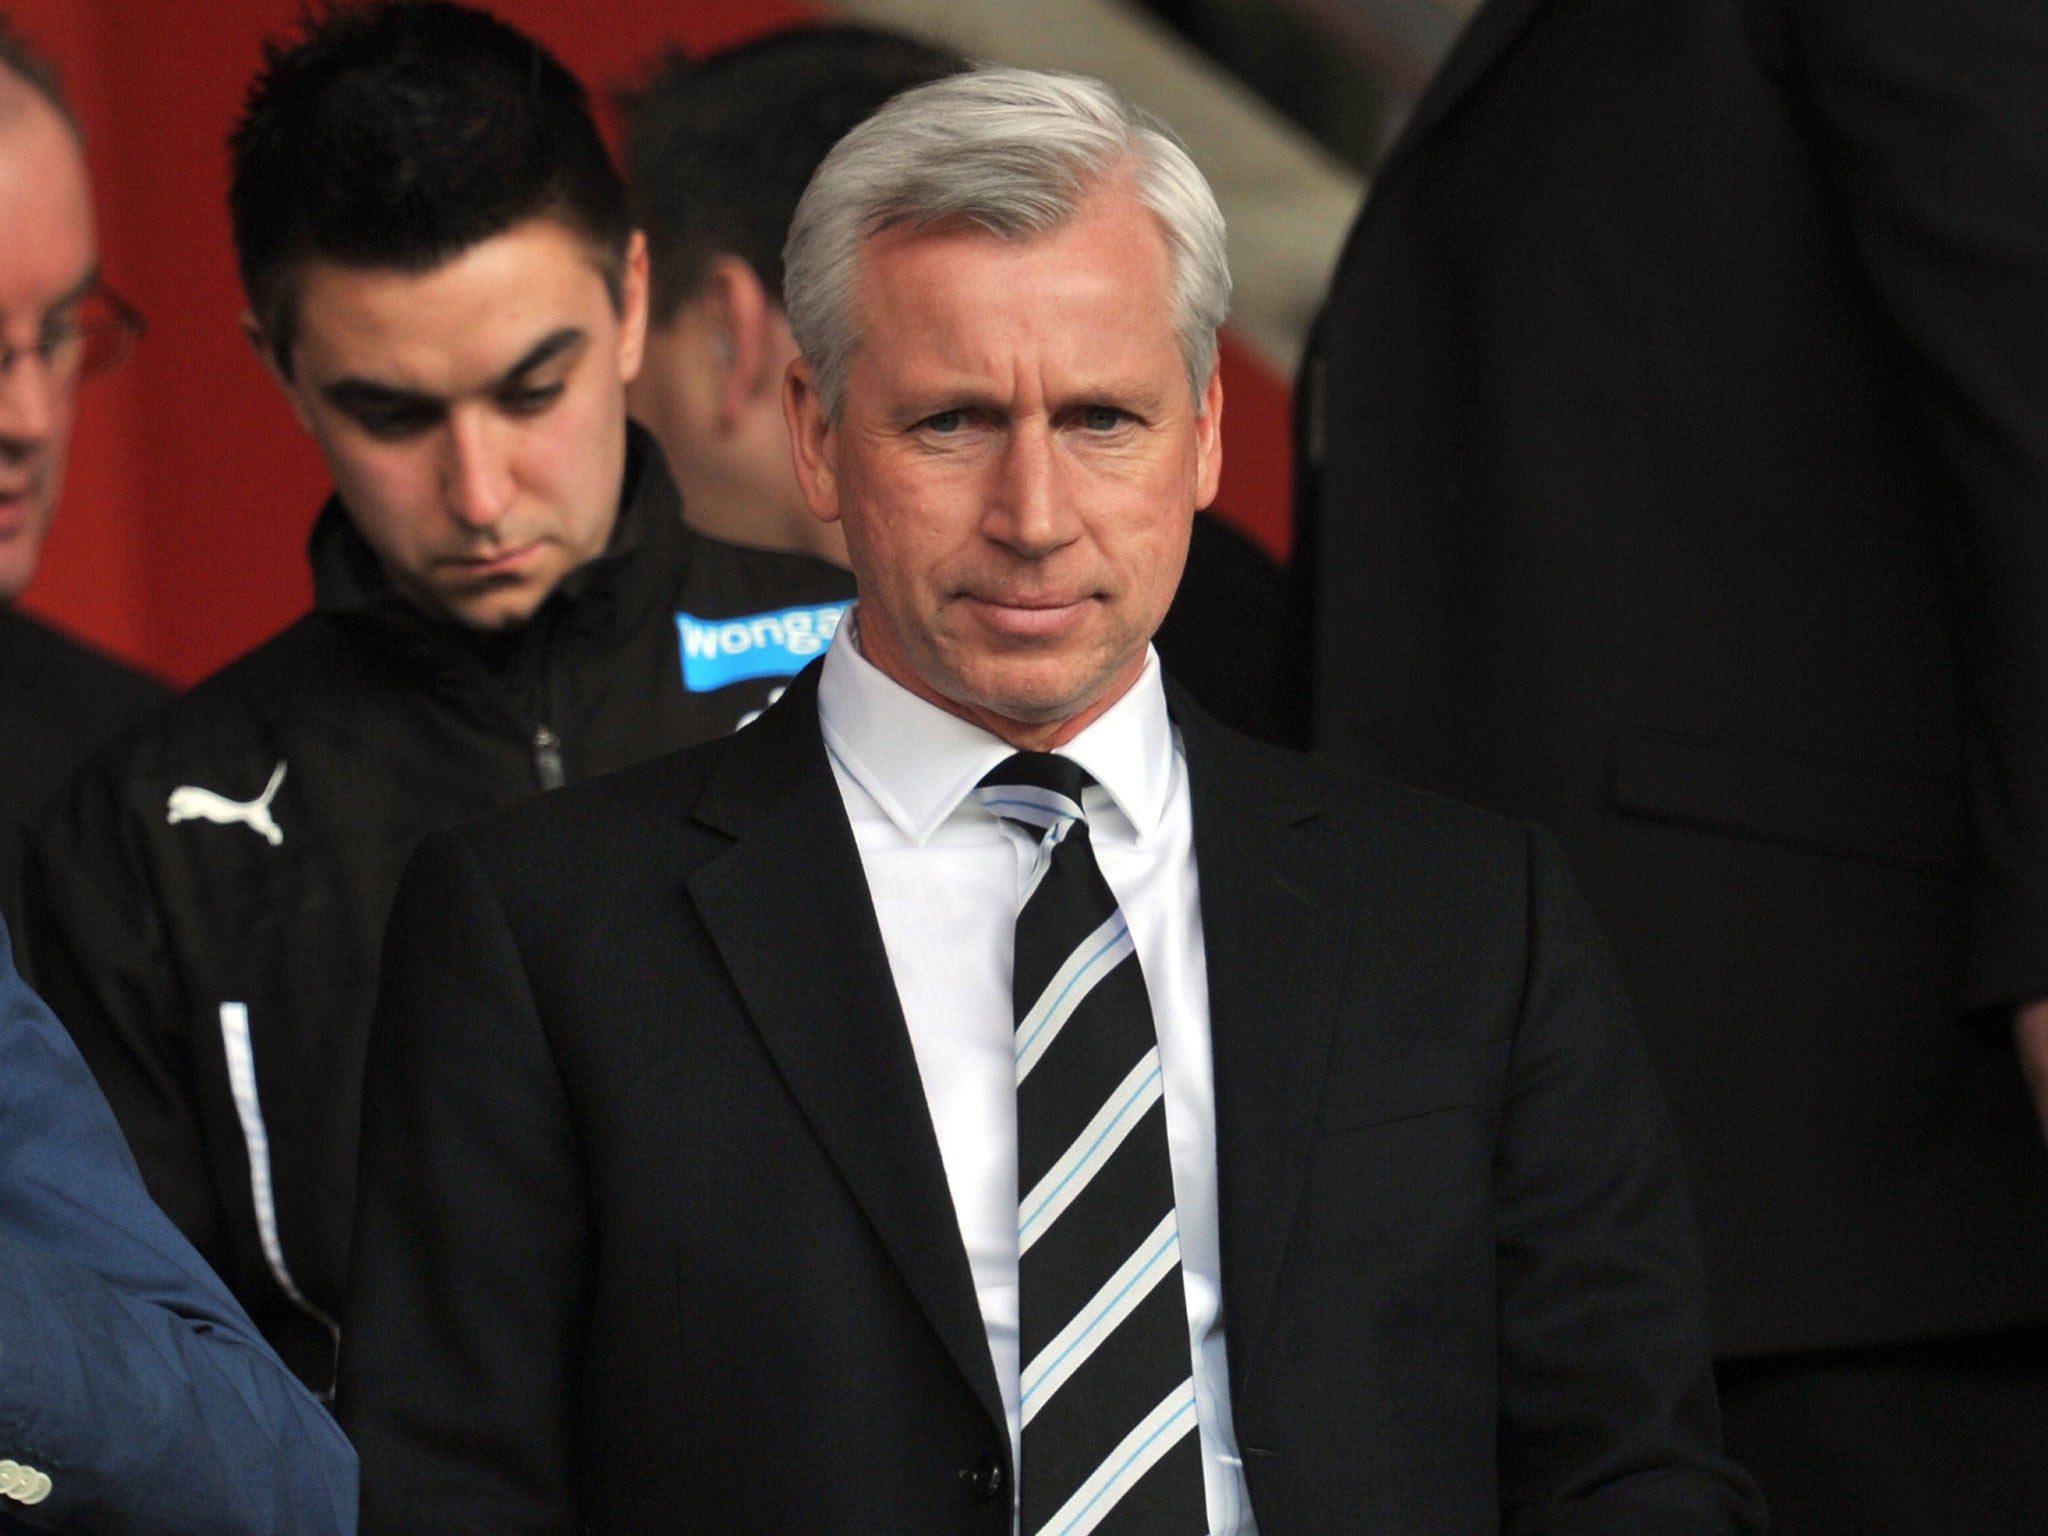 Alan Pardew takes his seat in the stands before Newcastle's 3-0 defeat at Southampton